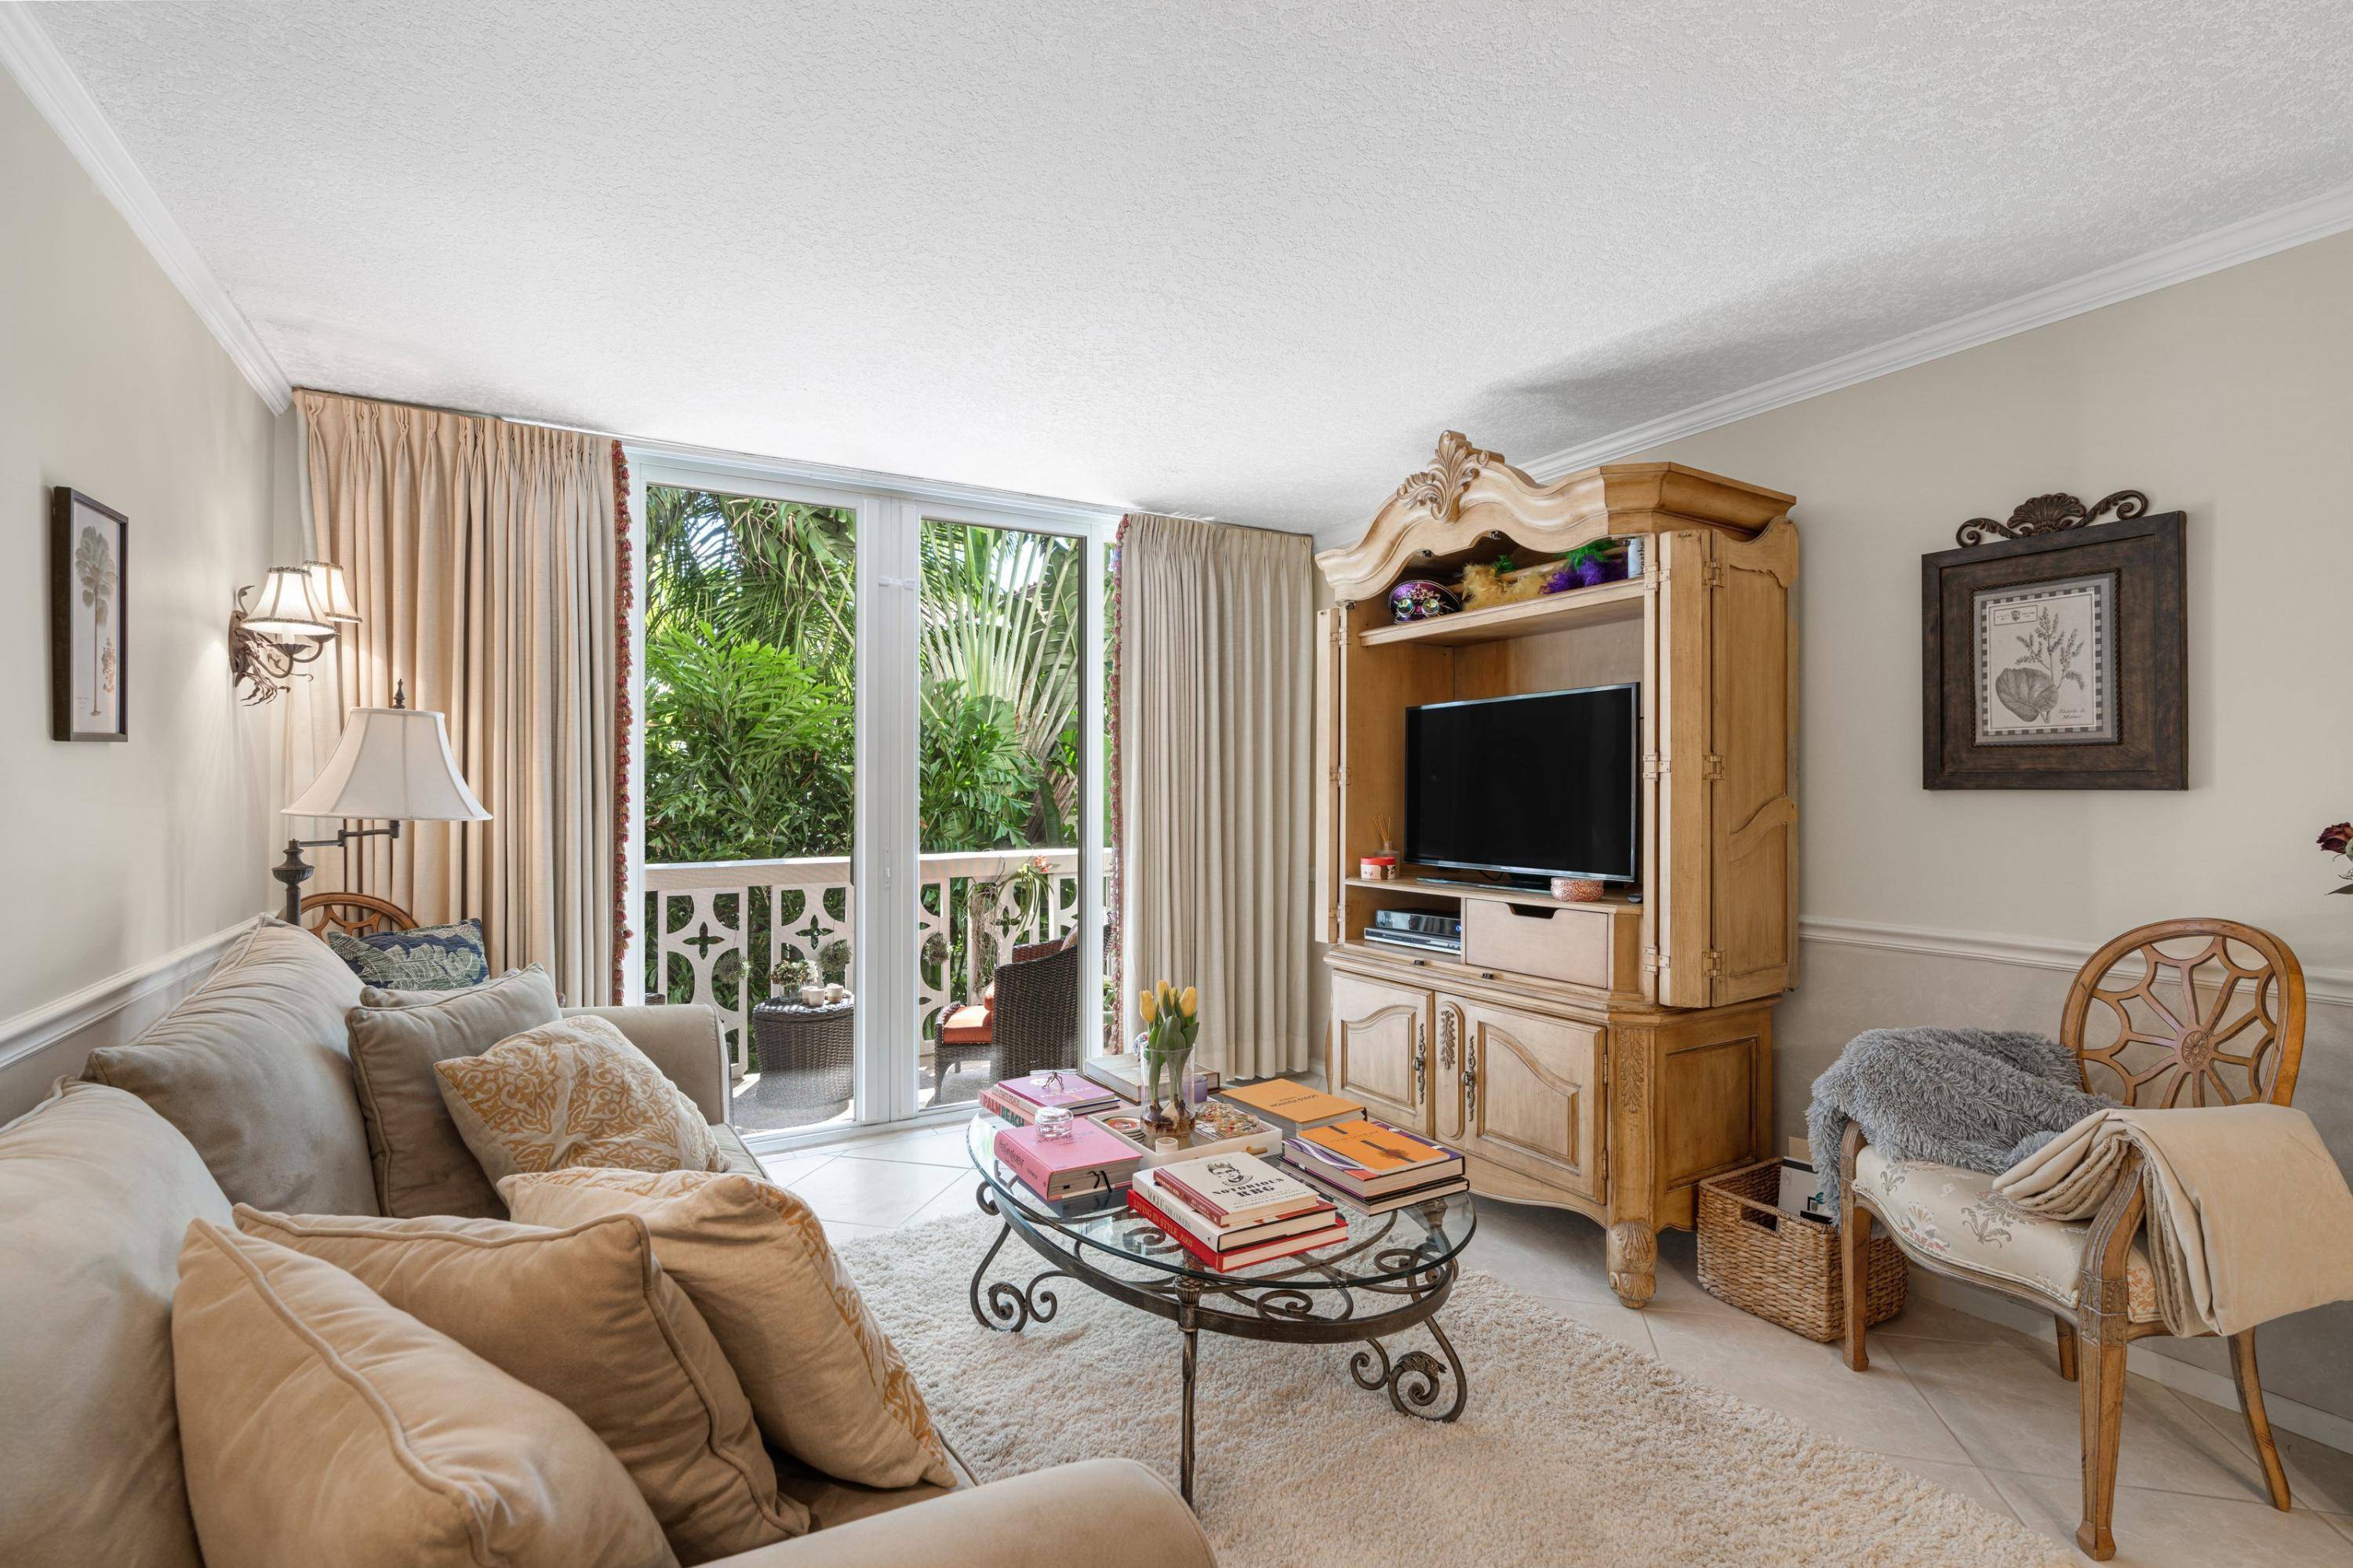 Great opportunity to own this tranquil rarely available one bedroom nestled in a boutique building in the center of Palm Beach.